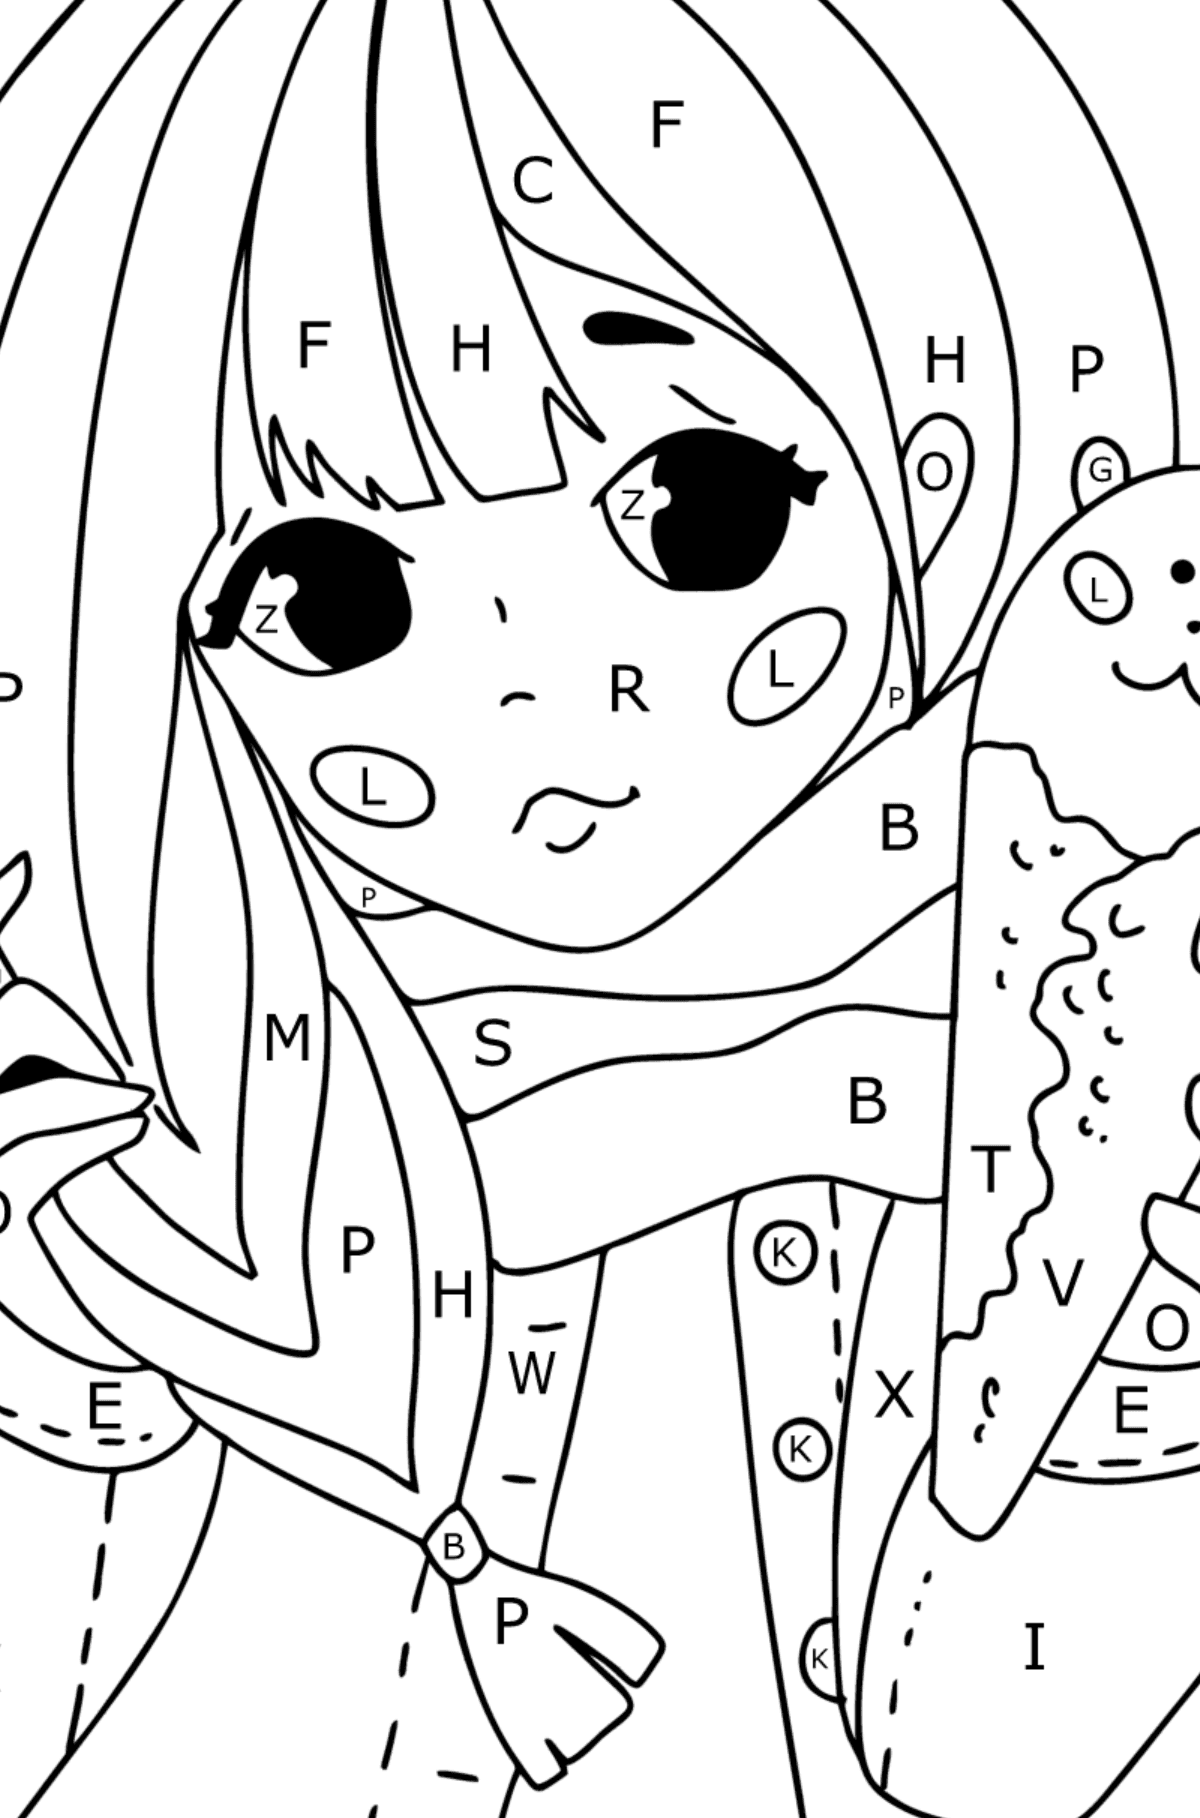 Cute anime girl - Woman coloring pages for Adults Print and Online